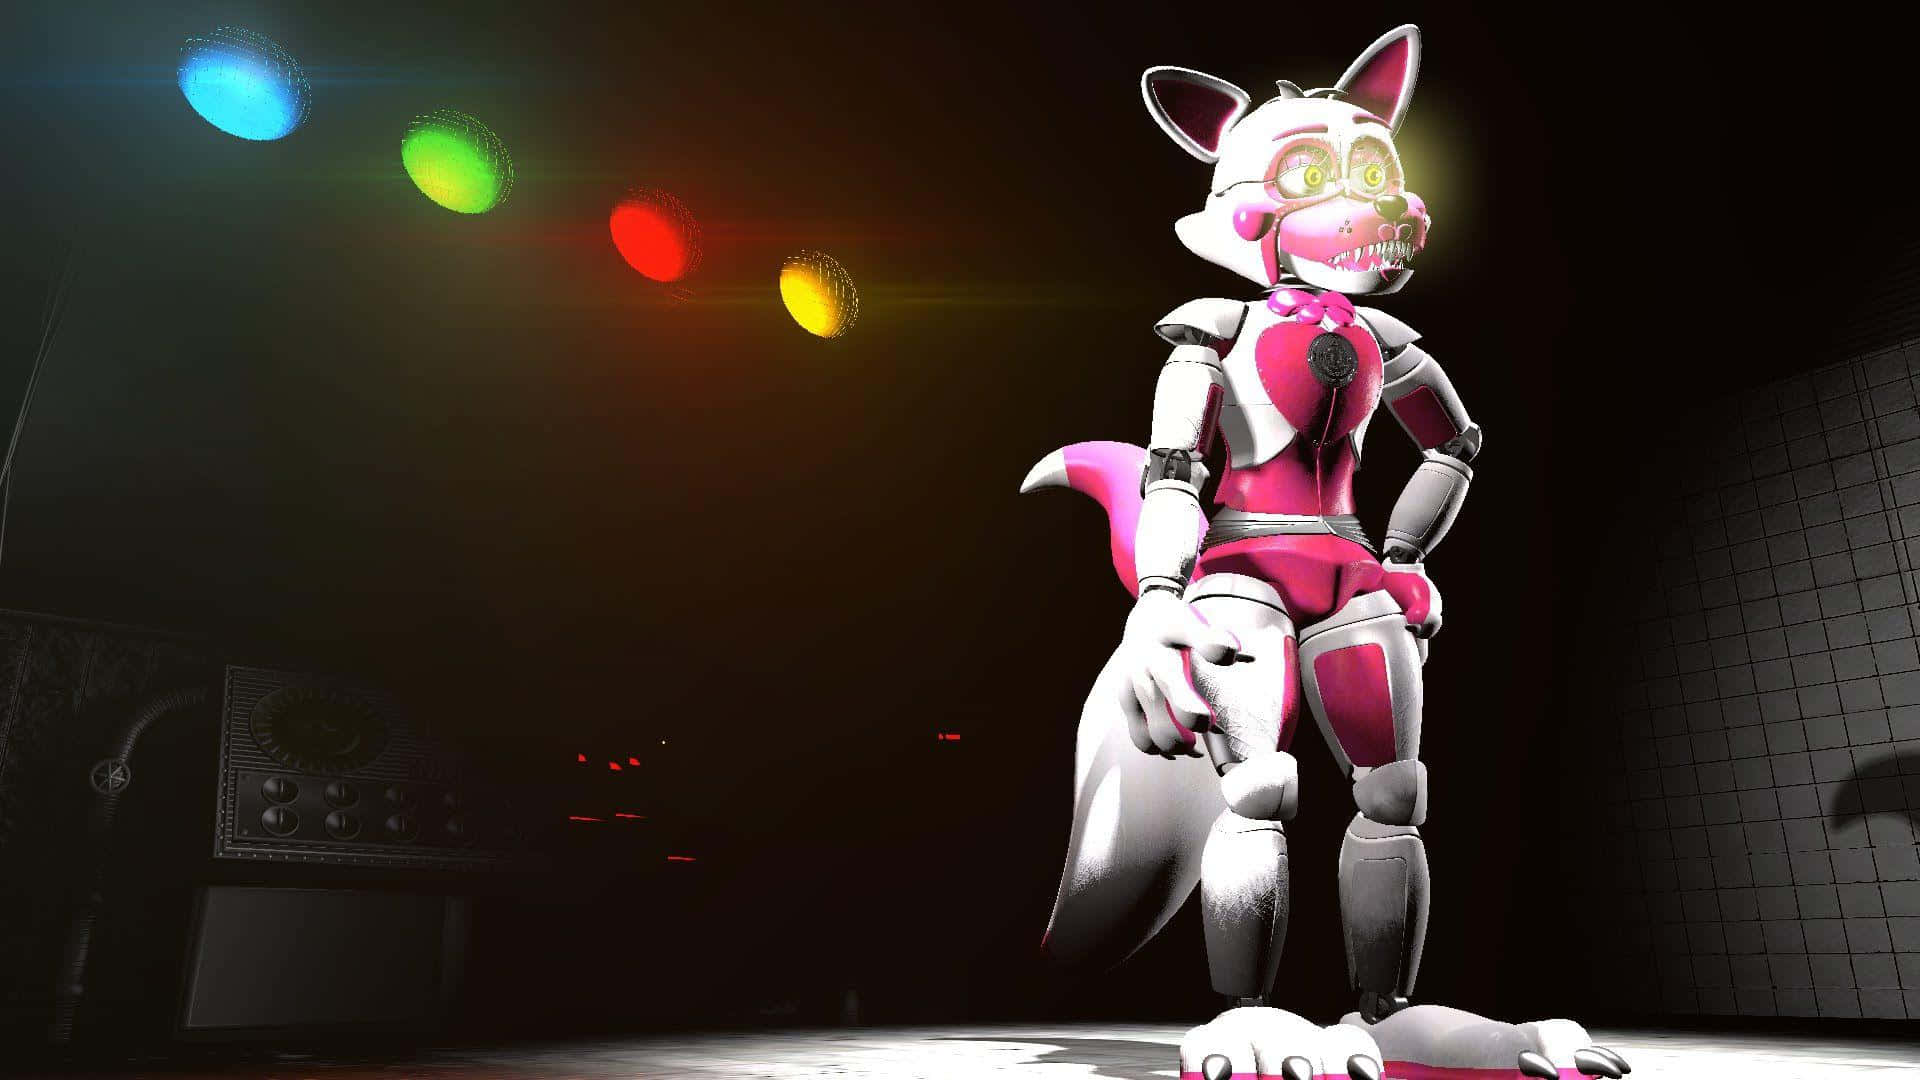 Funtime Foxy in a thrilling pose in front of a vibrant background Wallpaper